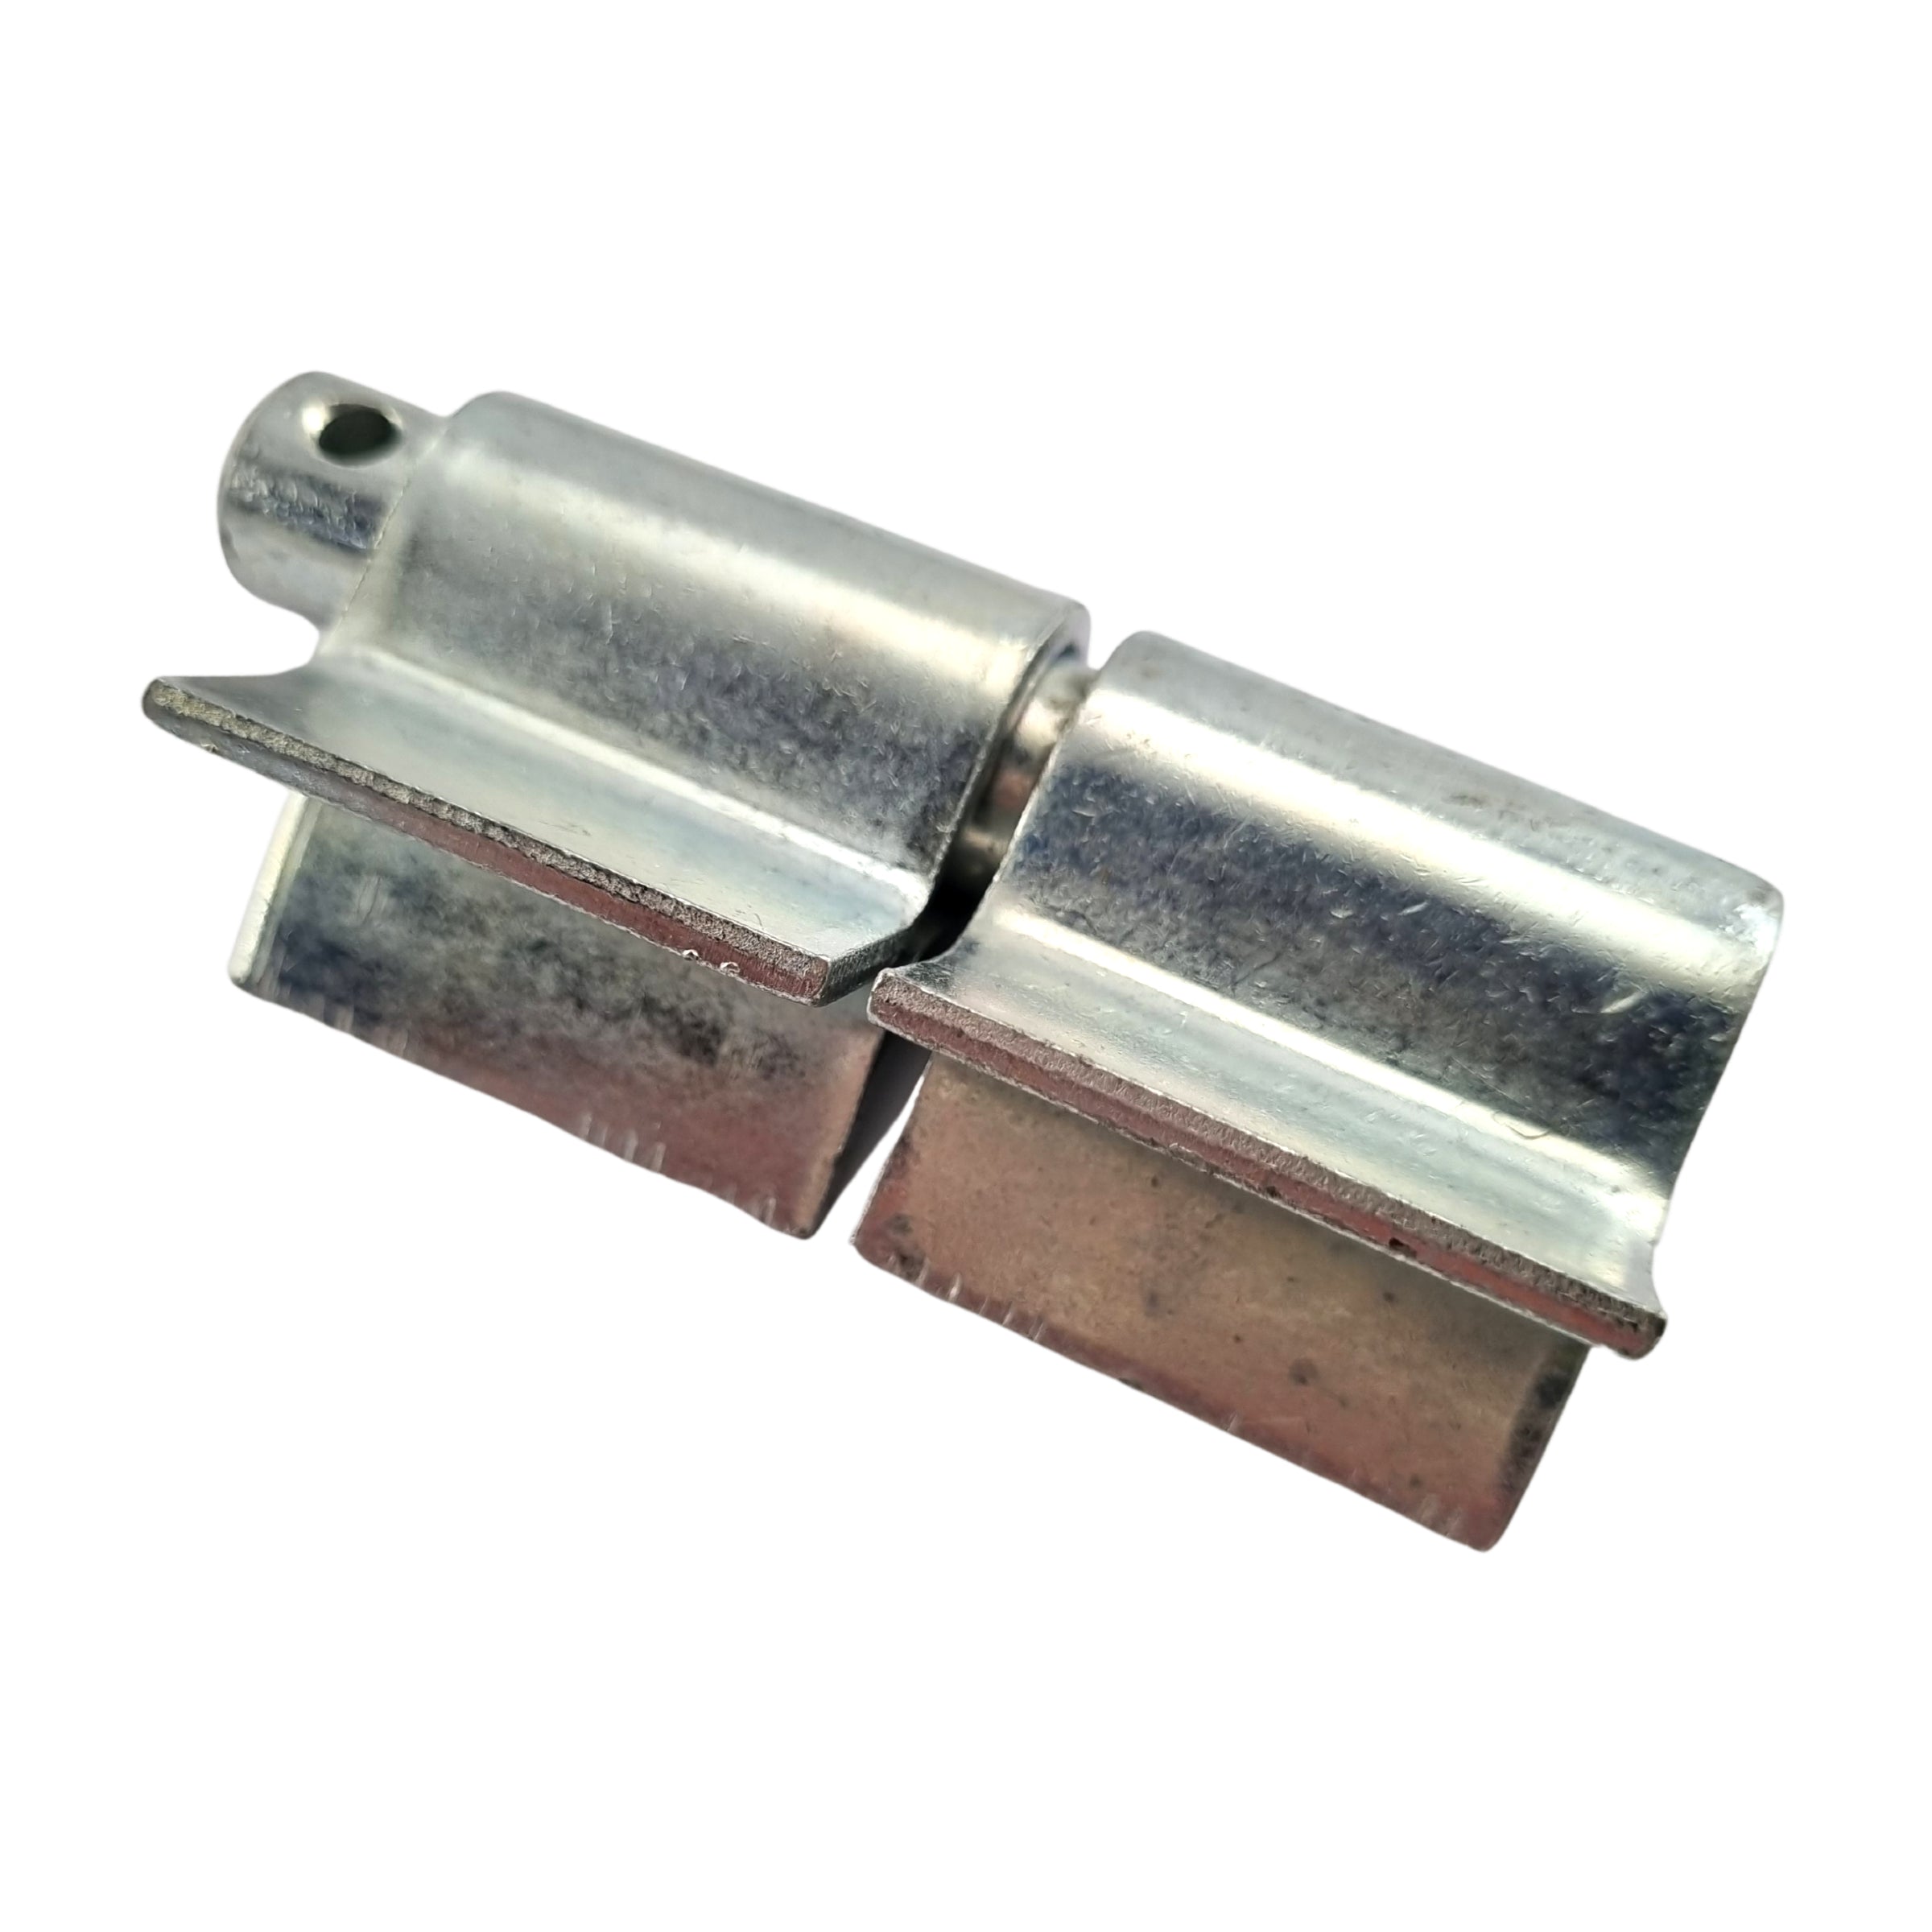 Weld On Socket - Assembly - Zinc Plated. Inc: 1 Socket + 1 Pin. Australian made. Shop fence and gate fittings online. Chain.com.au. Australia wide shipping.